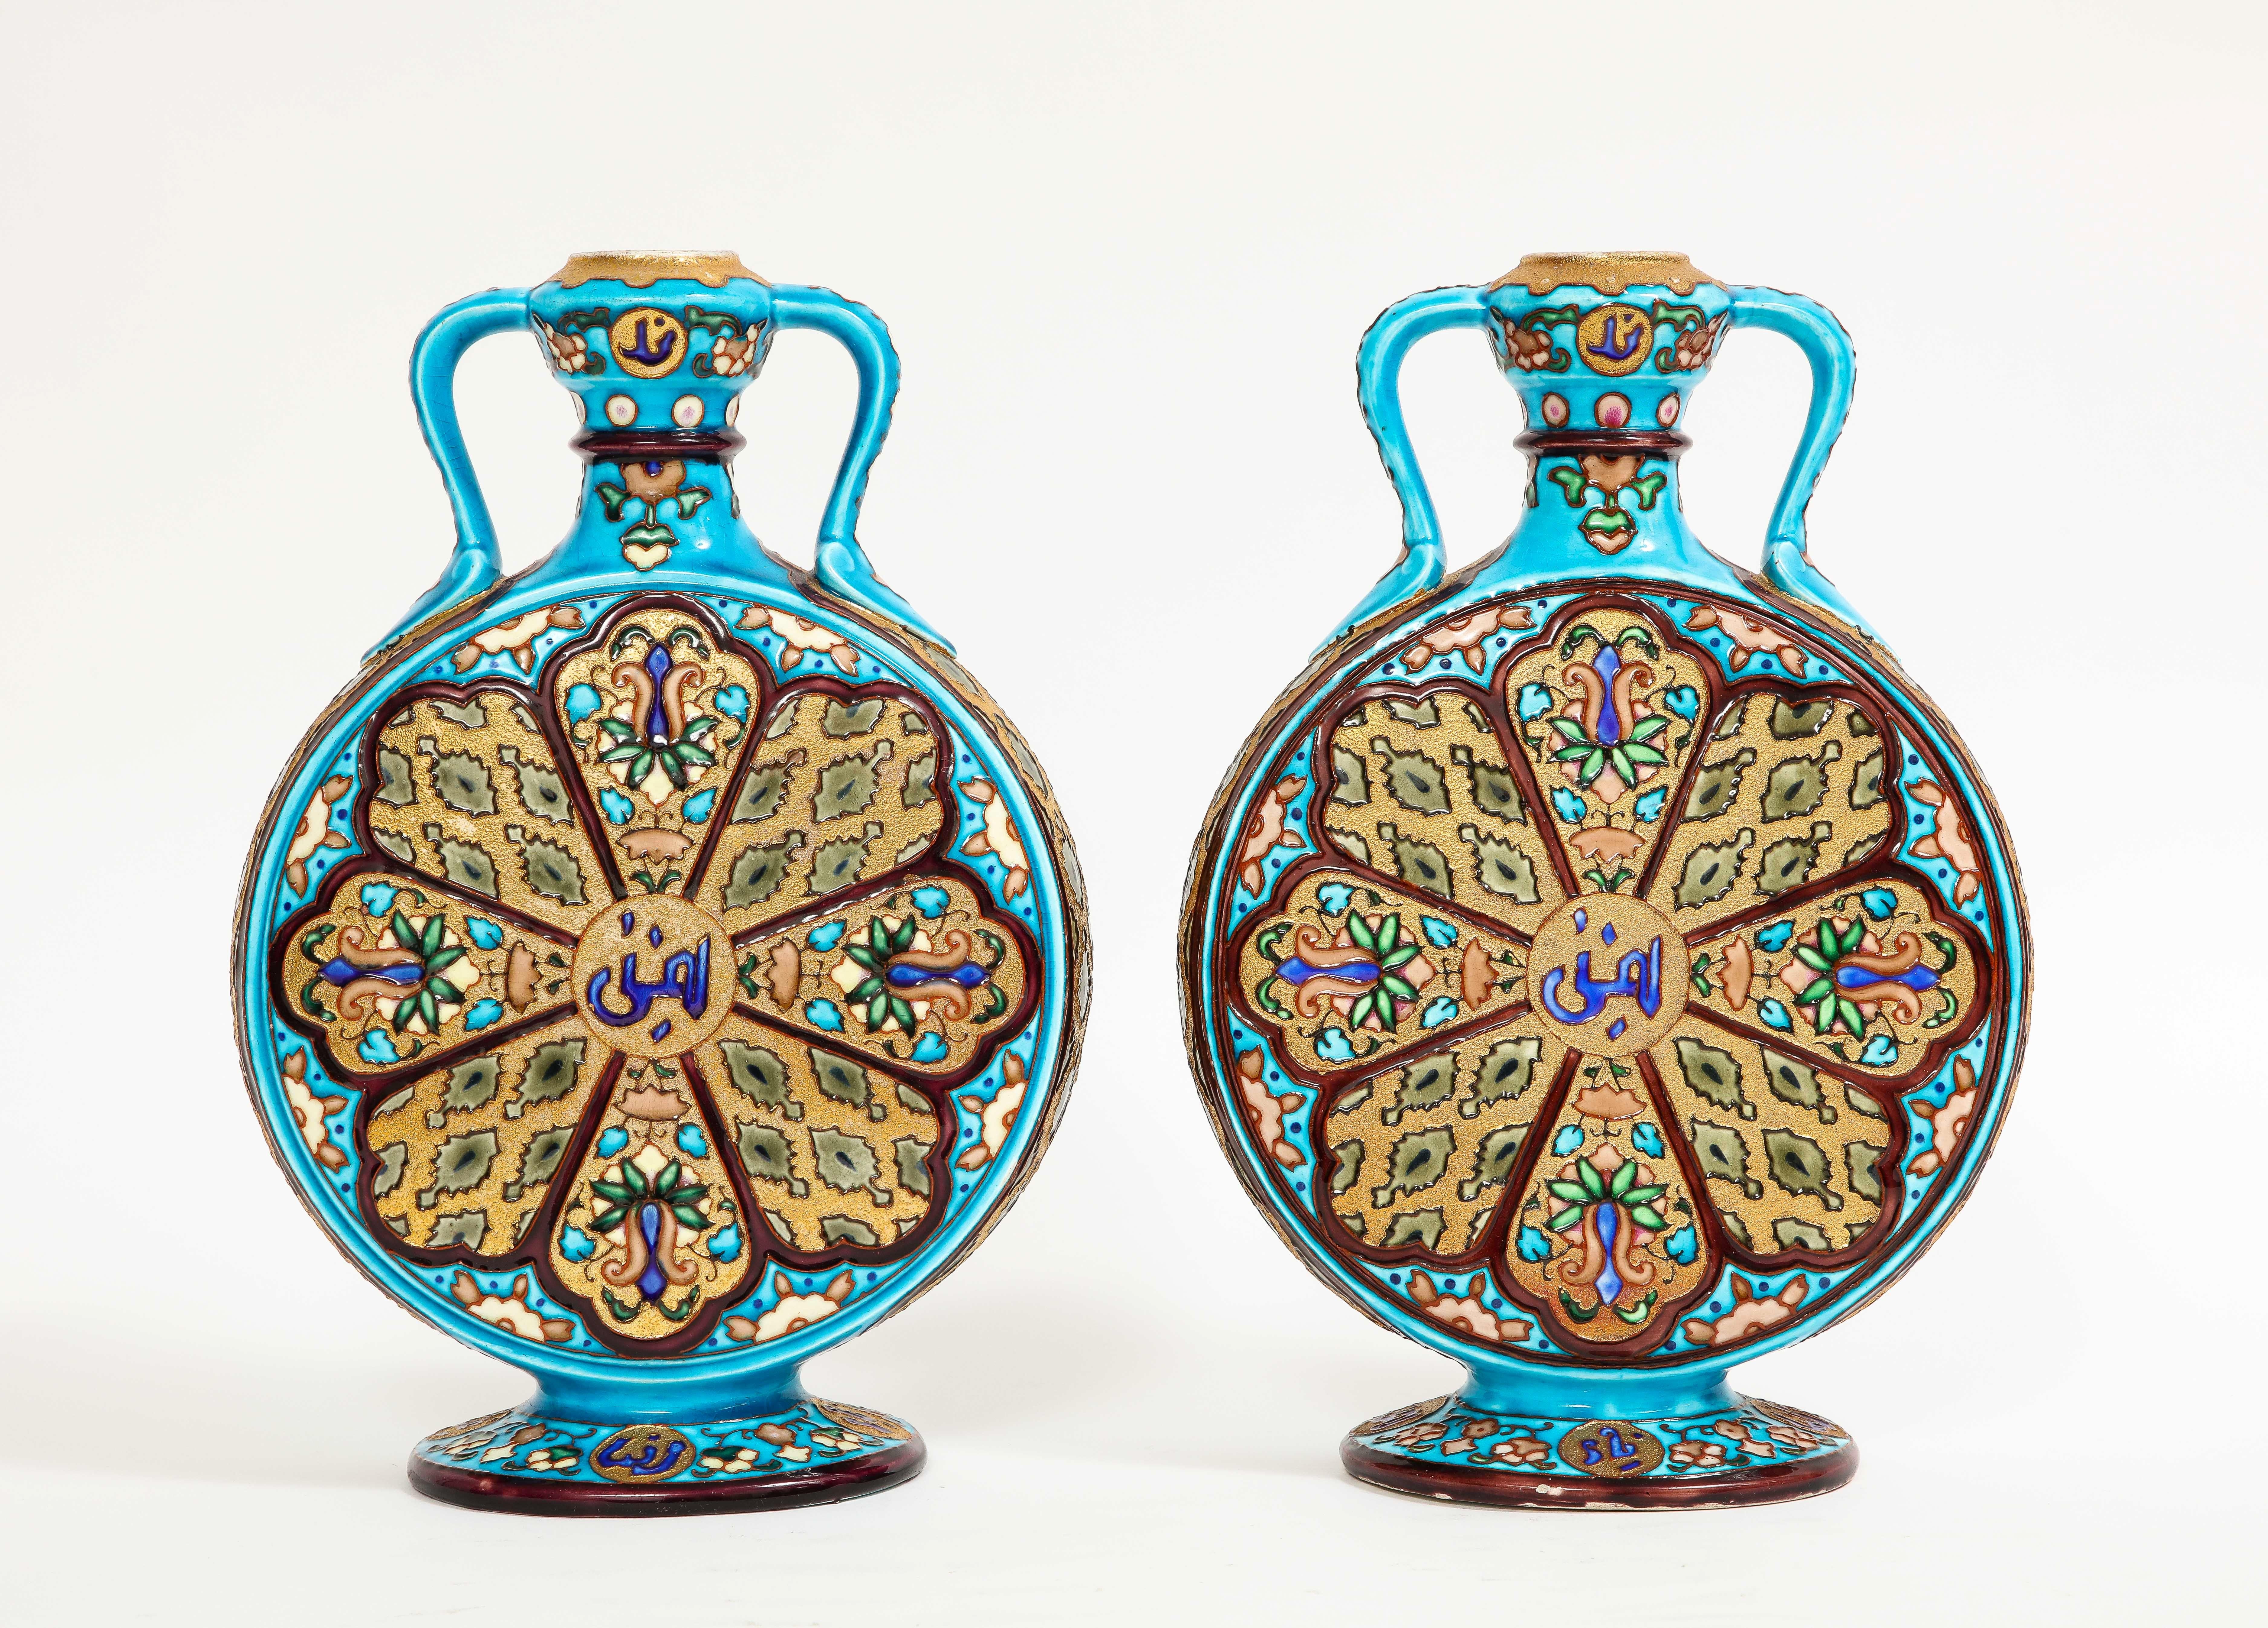 A beautiful pair of French Porcelain Moon flask vases, made for the Islamic/Moorish Market. Each vase has a moon flask form with a gorgeous turquoise ground. The hand-painted enamels on these pieces are quite elaborate and vibrant with blue, green,